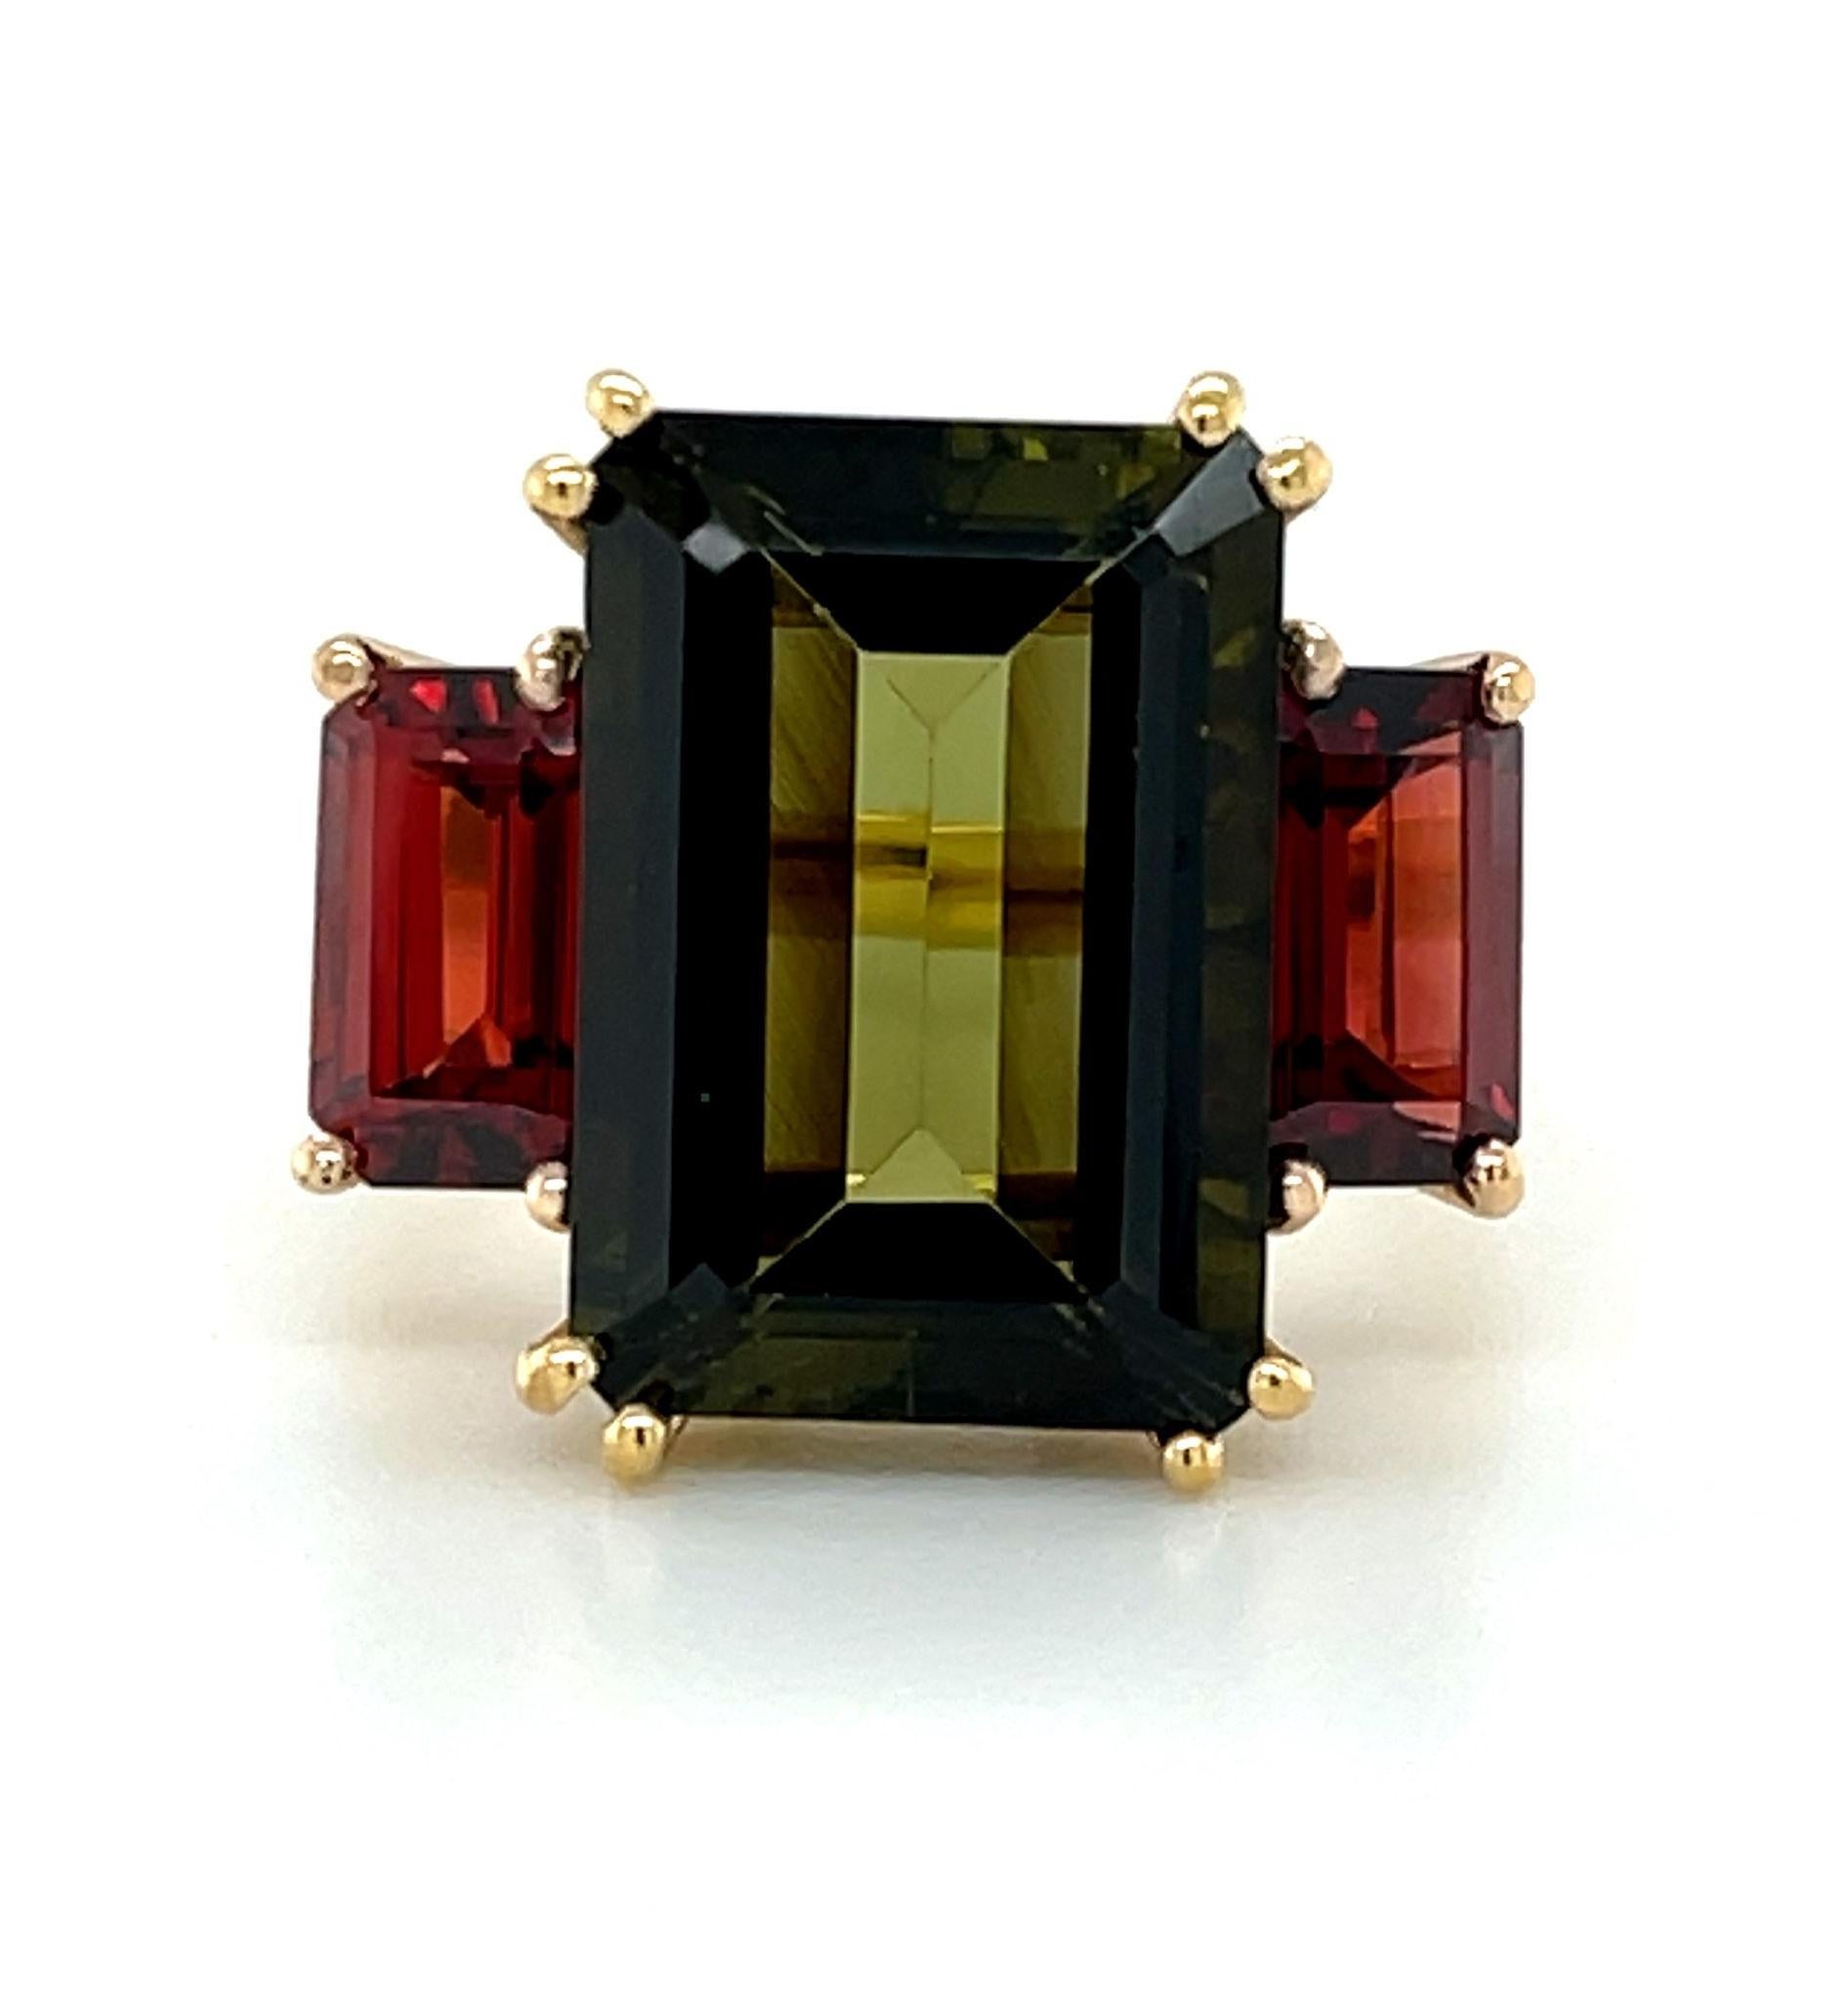 This unusual 3-stone cocktail ring features a large, 8.74 carat emerald-cut olive green tourmaline set with rich, red garnet side stones set in 18k yellow and rose gold. The center tourmaline is a crystalline gem with earthy, olive green color,